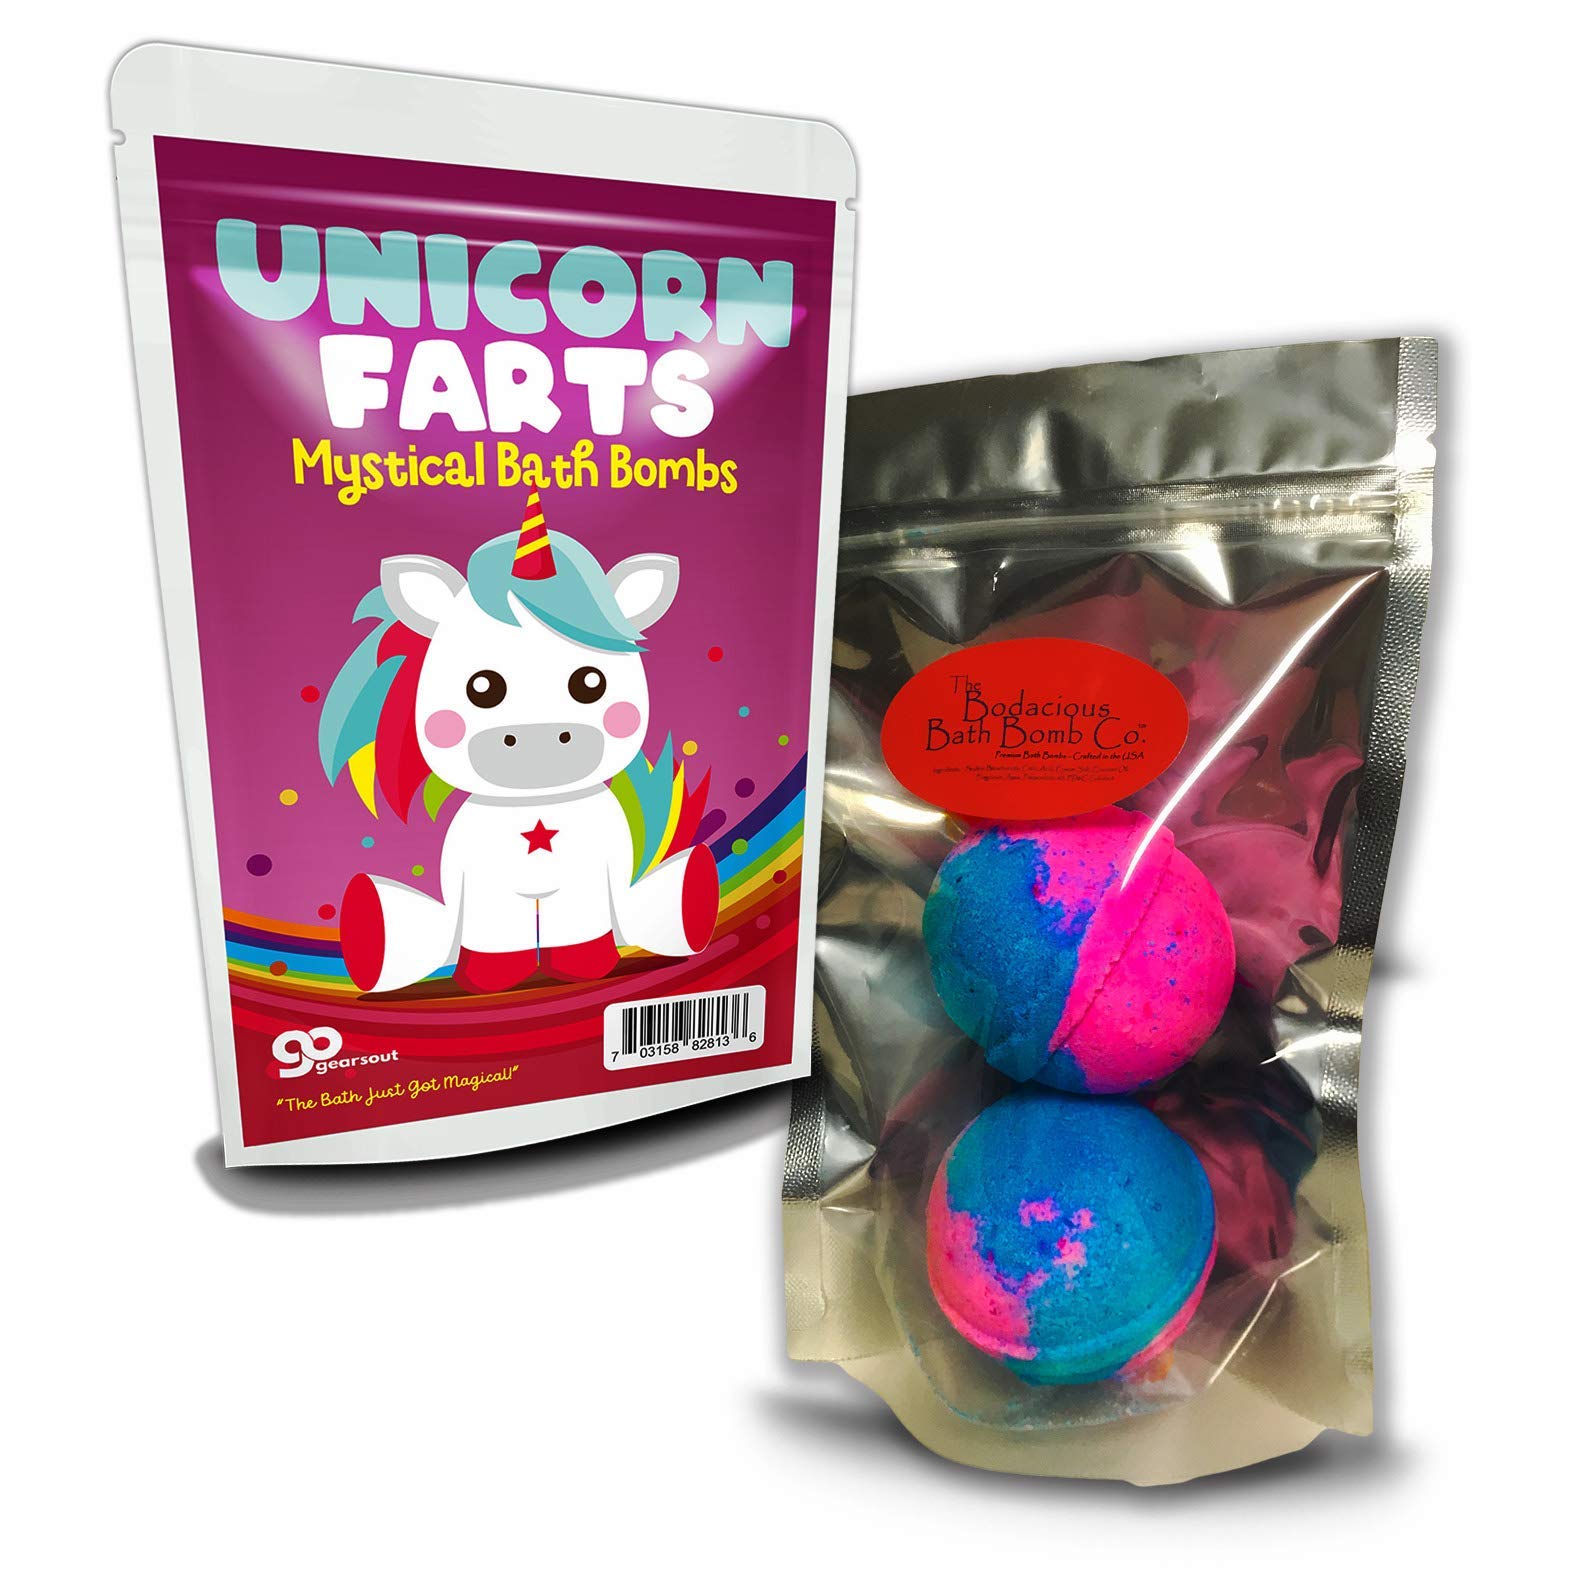 Unicorn Farts Bath Bombs - Cute Unicorn Rainbow Design - Fun XL Novelty Bath Fizzers for Girls - Blue and Pink, Cotton Candy Fragrance, 2 Count